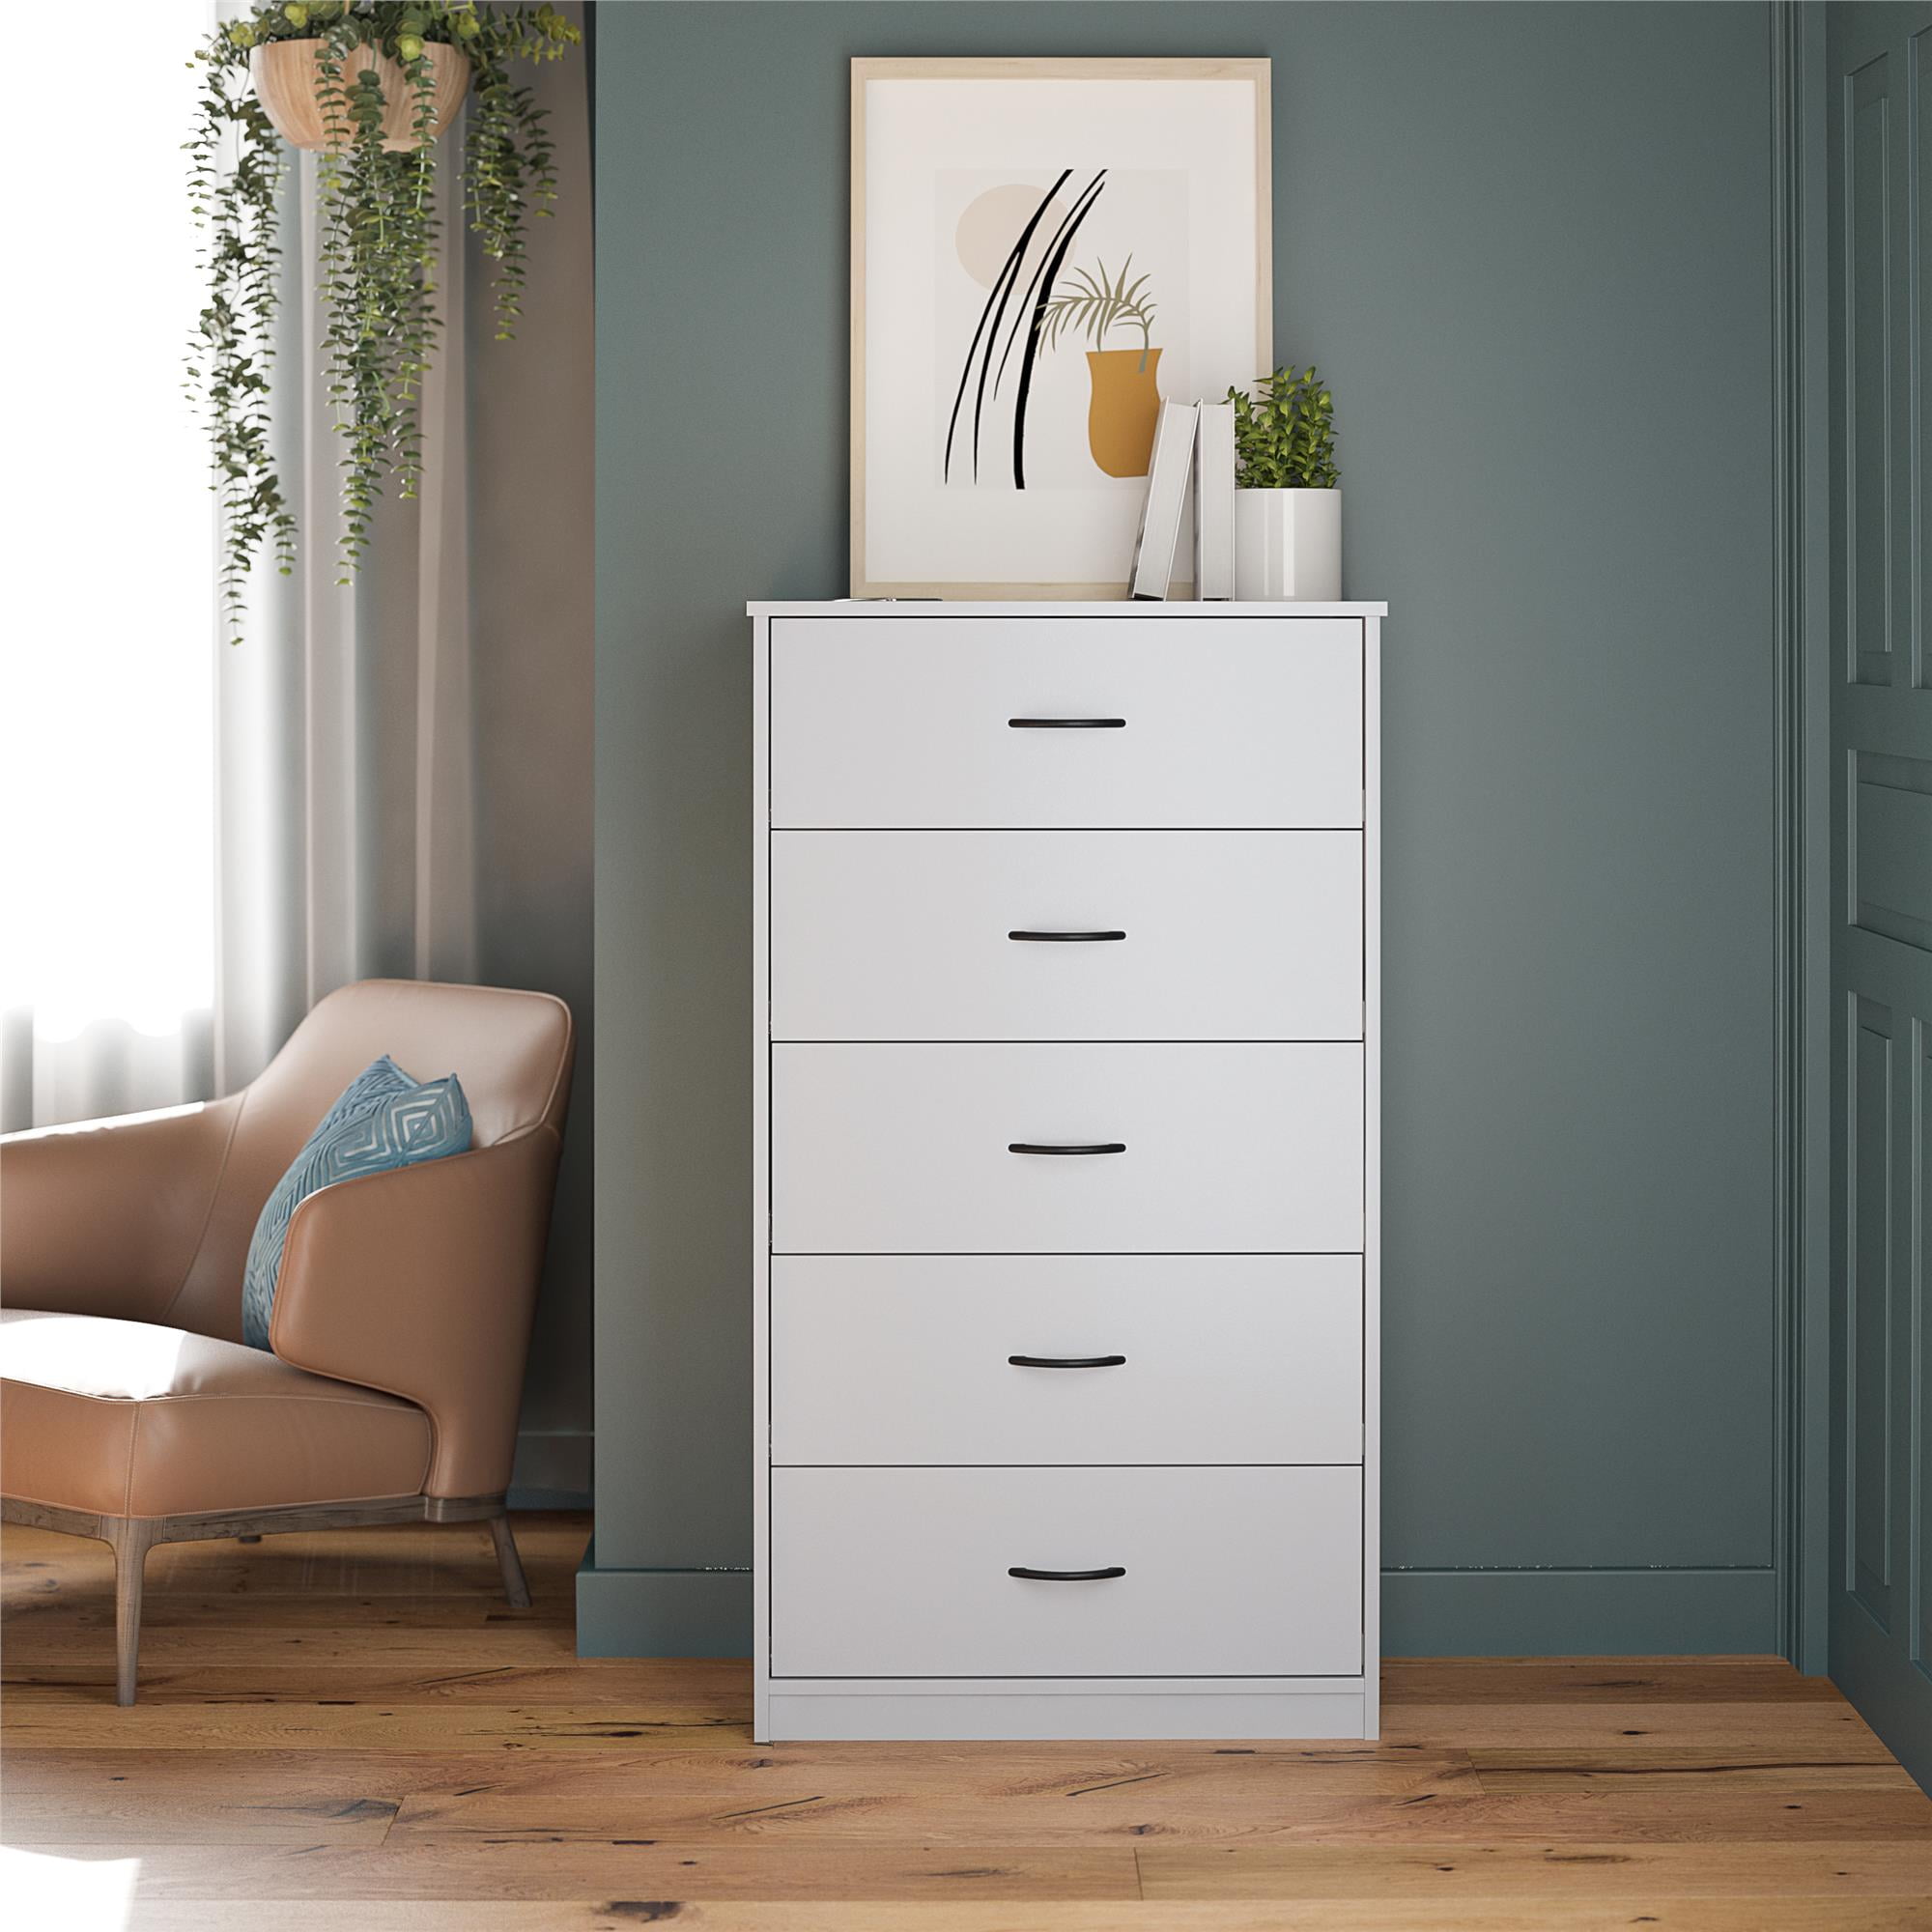 Modern Chest of Drawers Bedside Cabinet Table 1 3 5 Drawer White Grey Black Set 